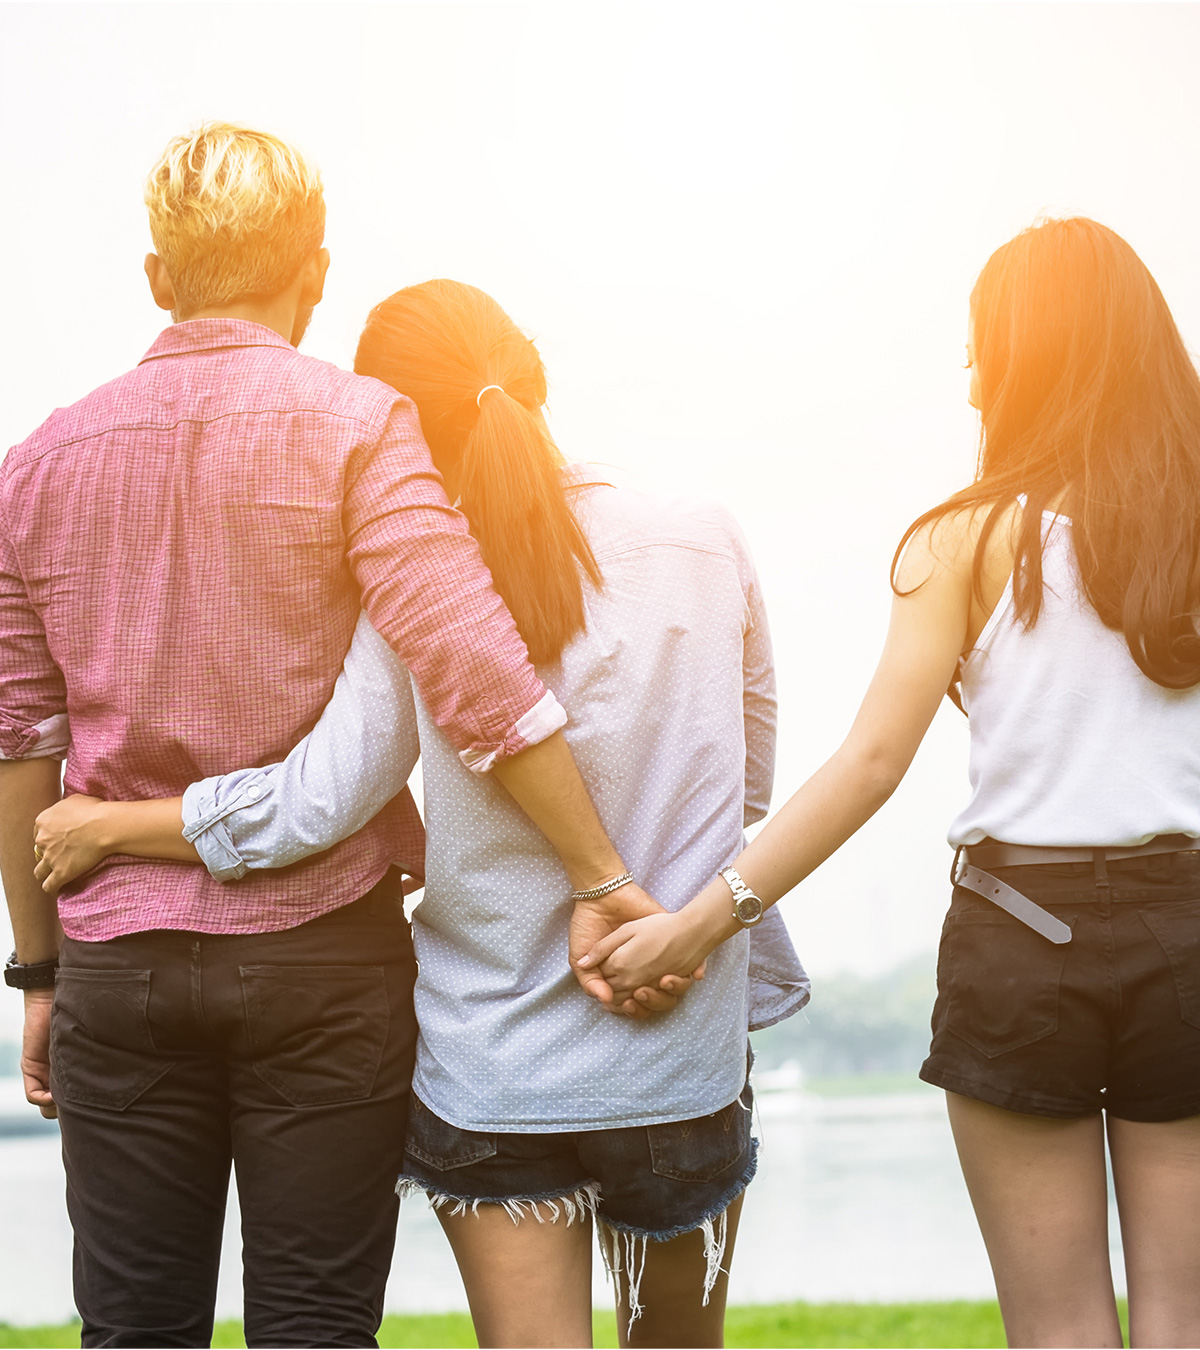 What Is Ethical Non-Monogamy? Its Types And Rules